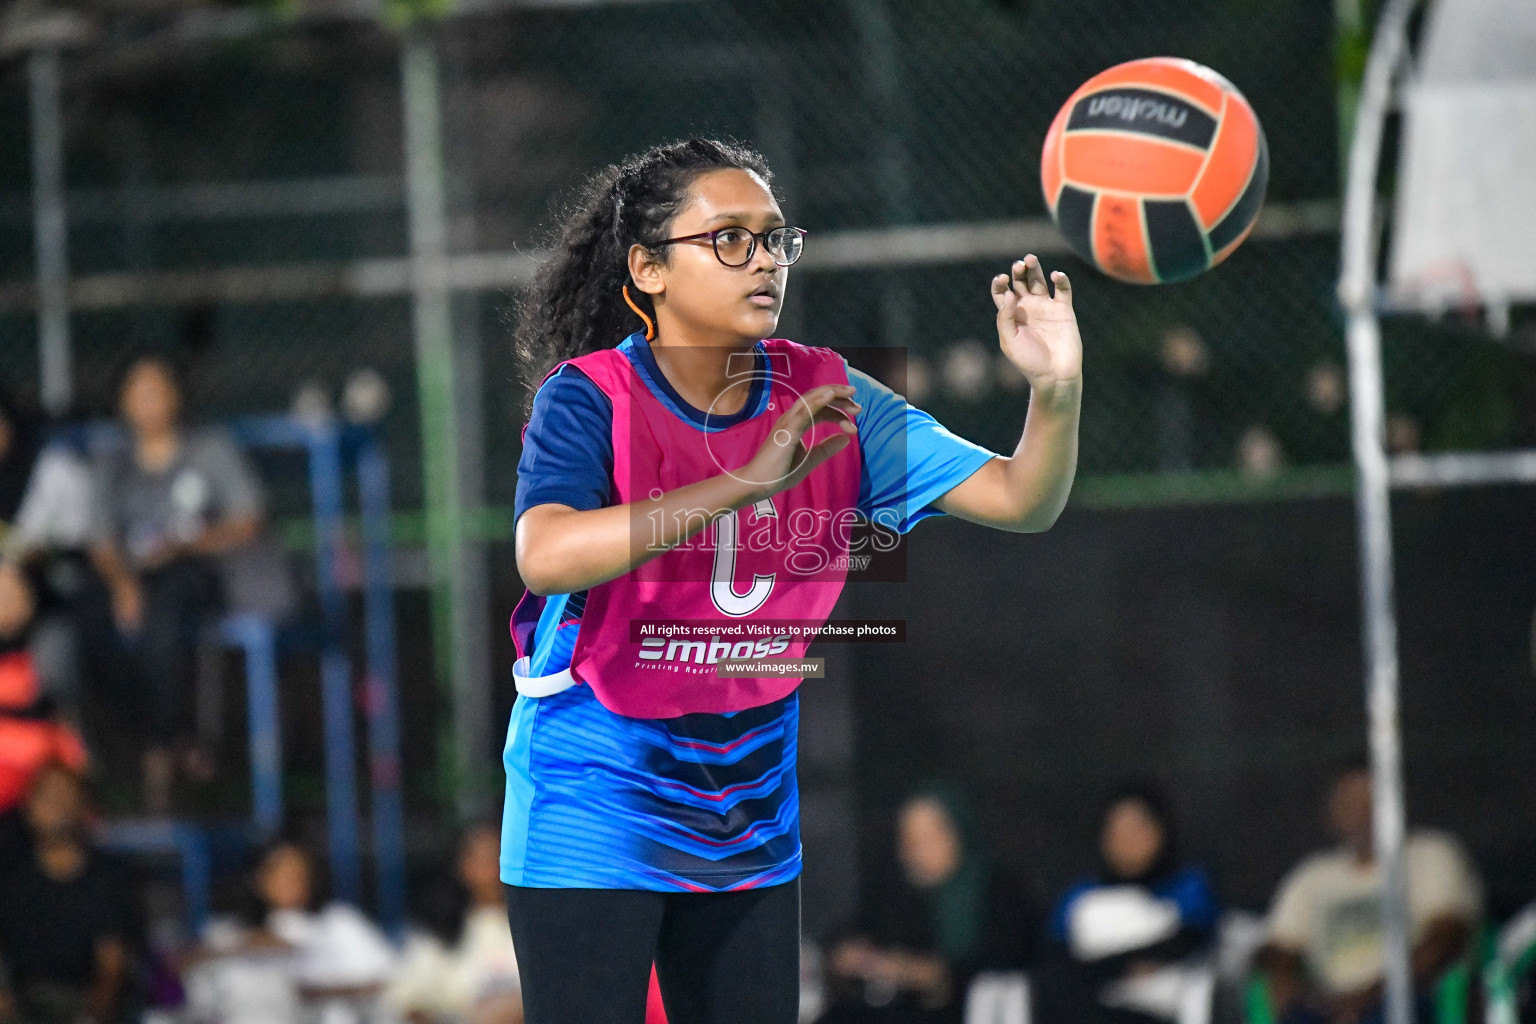 Day 9 of 20th Milo National Netball Tournament 2023, held in Synthetic Netball Court, Male', Maldives on 8th June 2023 Photos: Nausham Waheed/ Images.mv